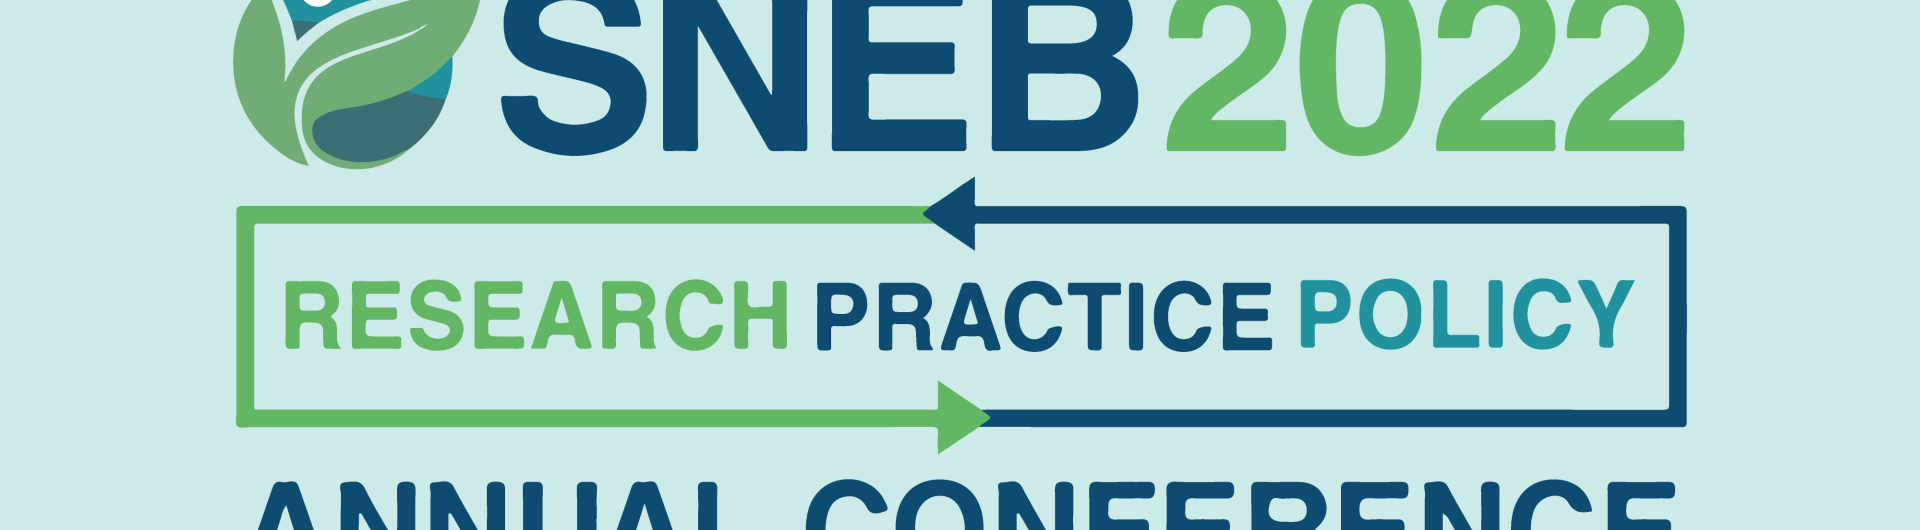 2022 SNEB Conference